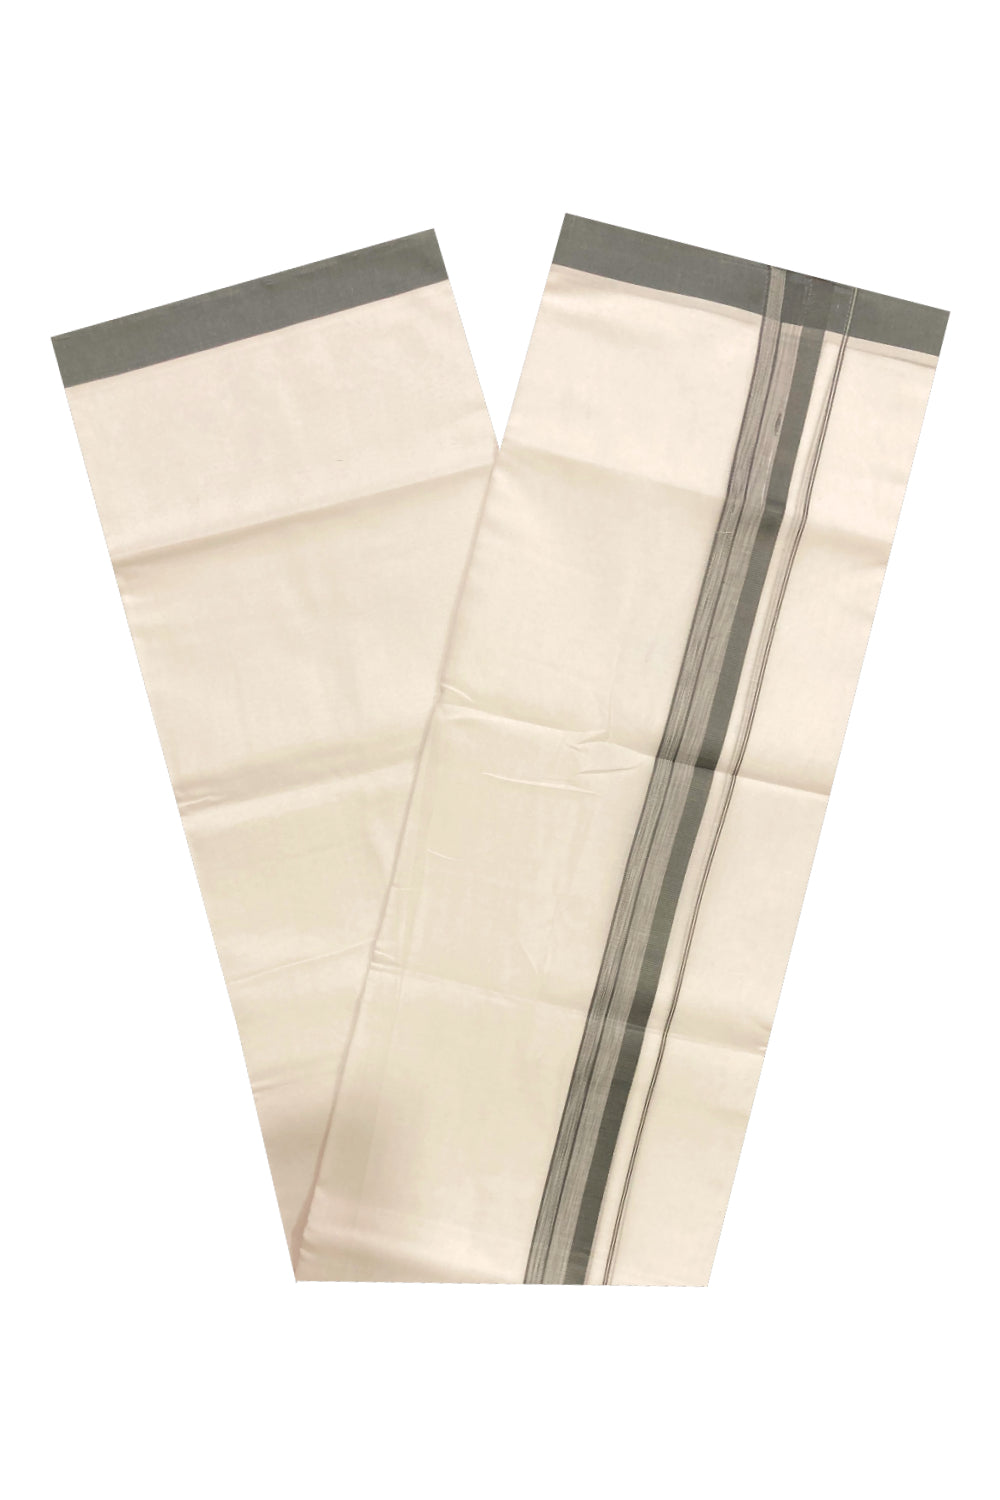 Pure White Cotton Double Mundu with Grey Border (South Indian Dhoti)